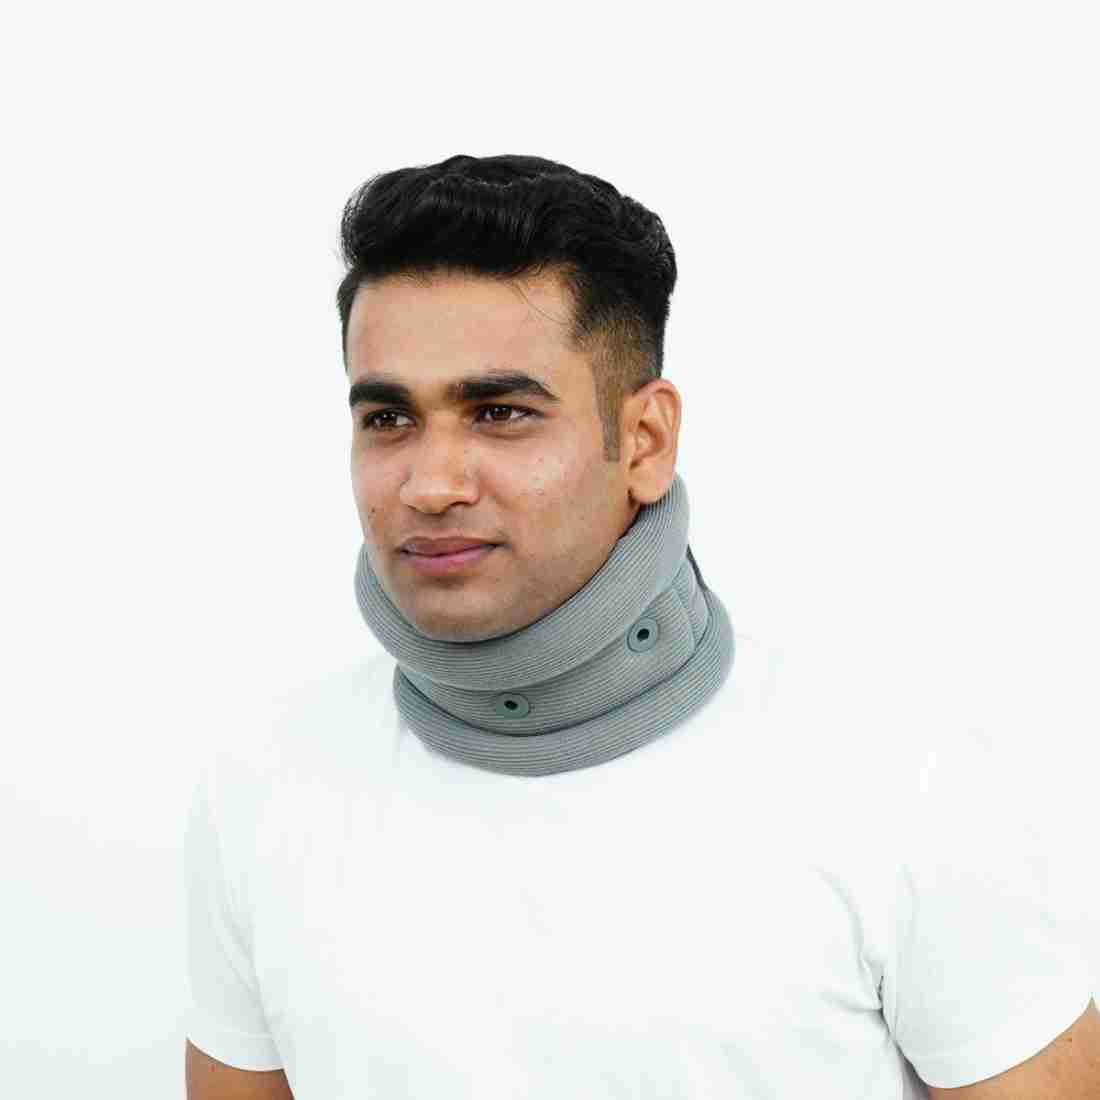 NUBICO Soft Cervical Collar with Neck Support (Blue,L) Neck Support - Buy  NUBICO Soft Cervical Collar with Neck Support (Blue,L) Neck Support Online  at Best Prices in India - Fitness